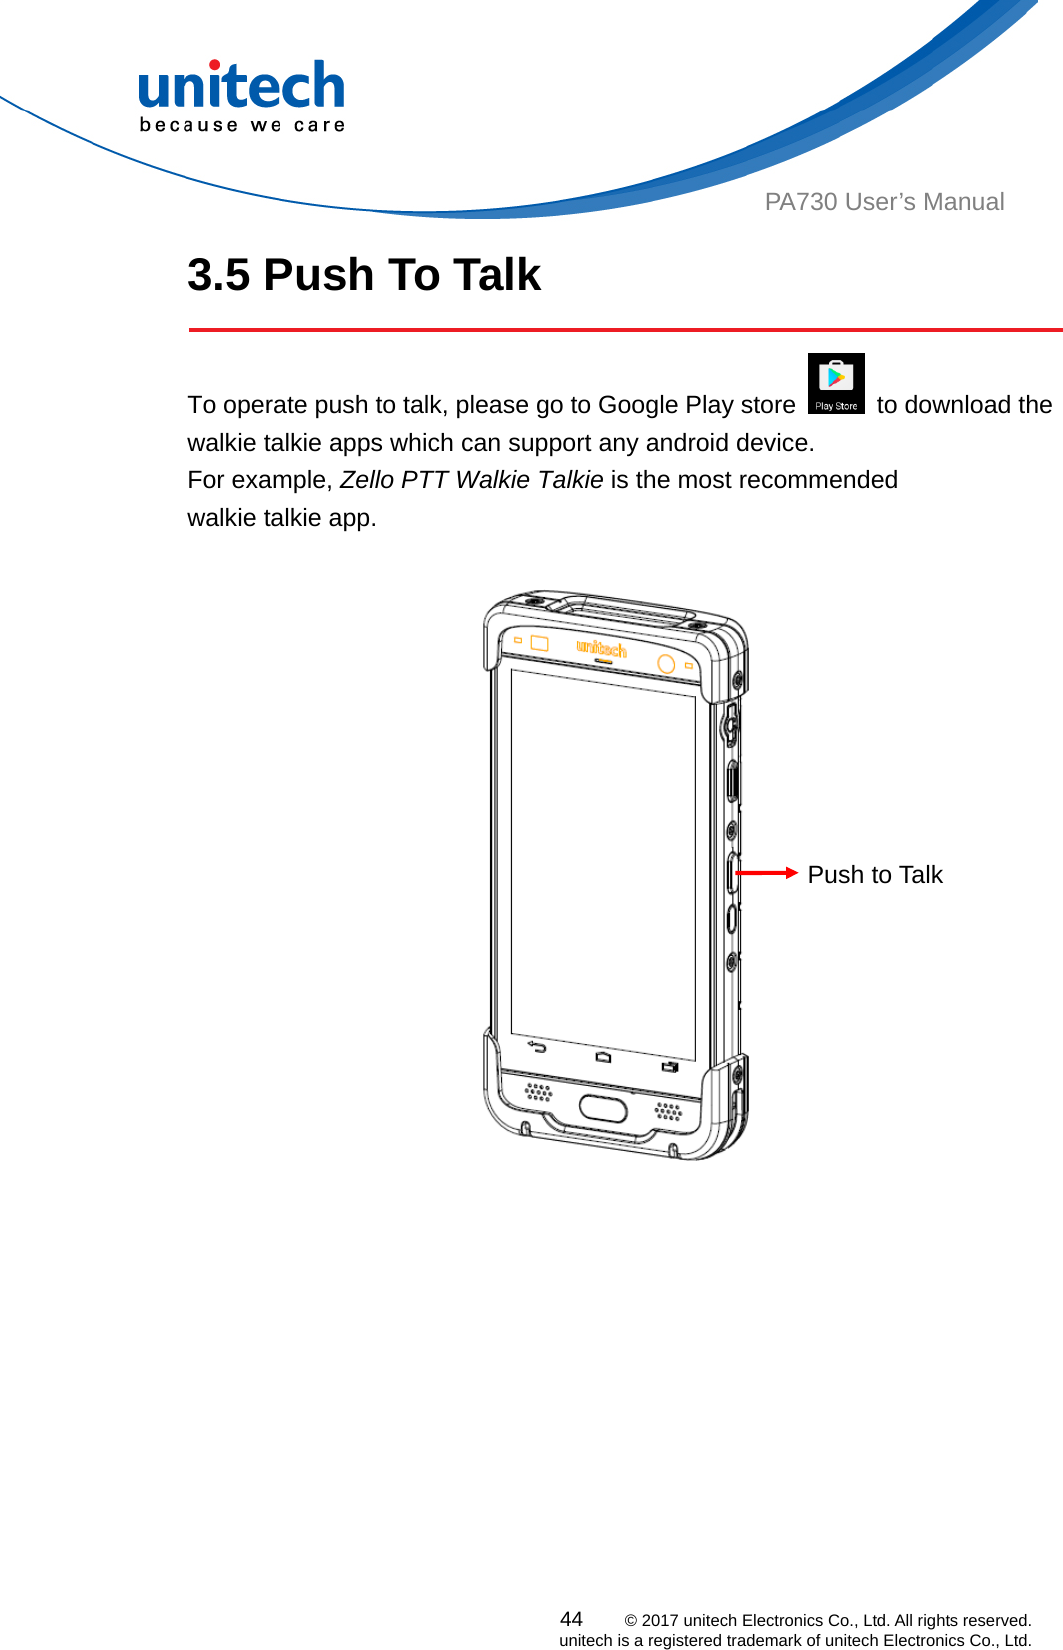  PA730 User’s Manual 3.5 Push To Talk    To operate push to talk, please go to Google Play store    to download the walkie talkie apps which can support any android device.   For example, Zello PTT Walkie Talkie is the most recommended   walkie talkie app.    Push to Talk 44    © 2017 unitech Electronics Co., Ltd. All rights reserved.   unitech is a registered trademark of unitech Electronics Co., Ltd. 